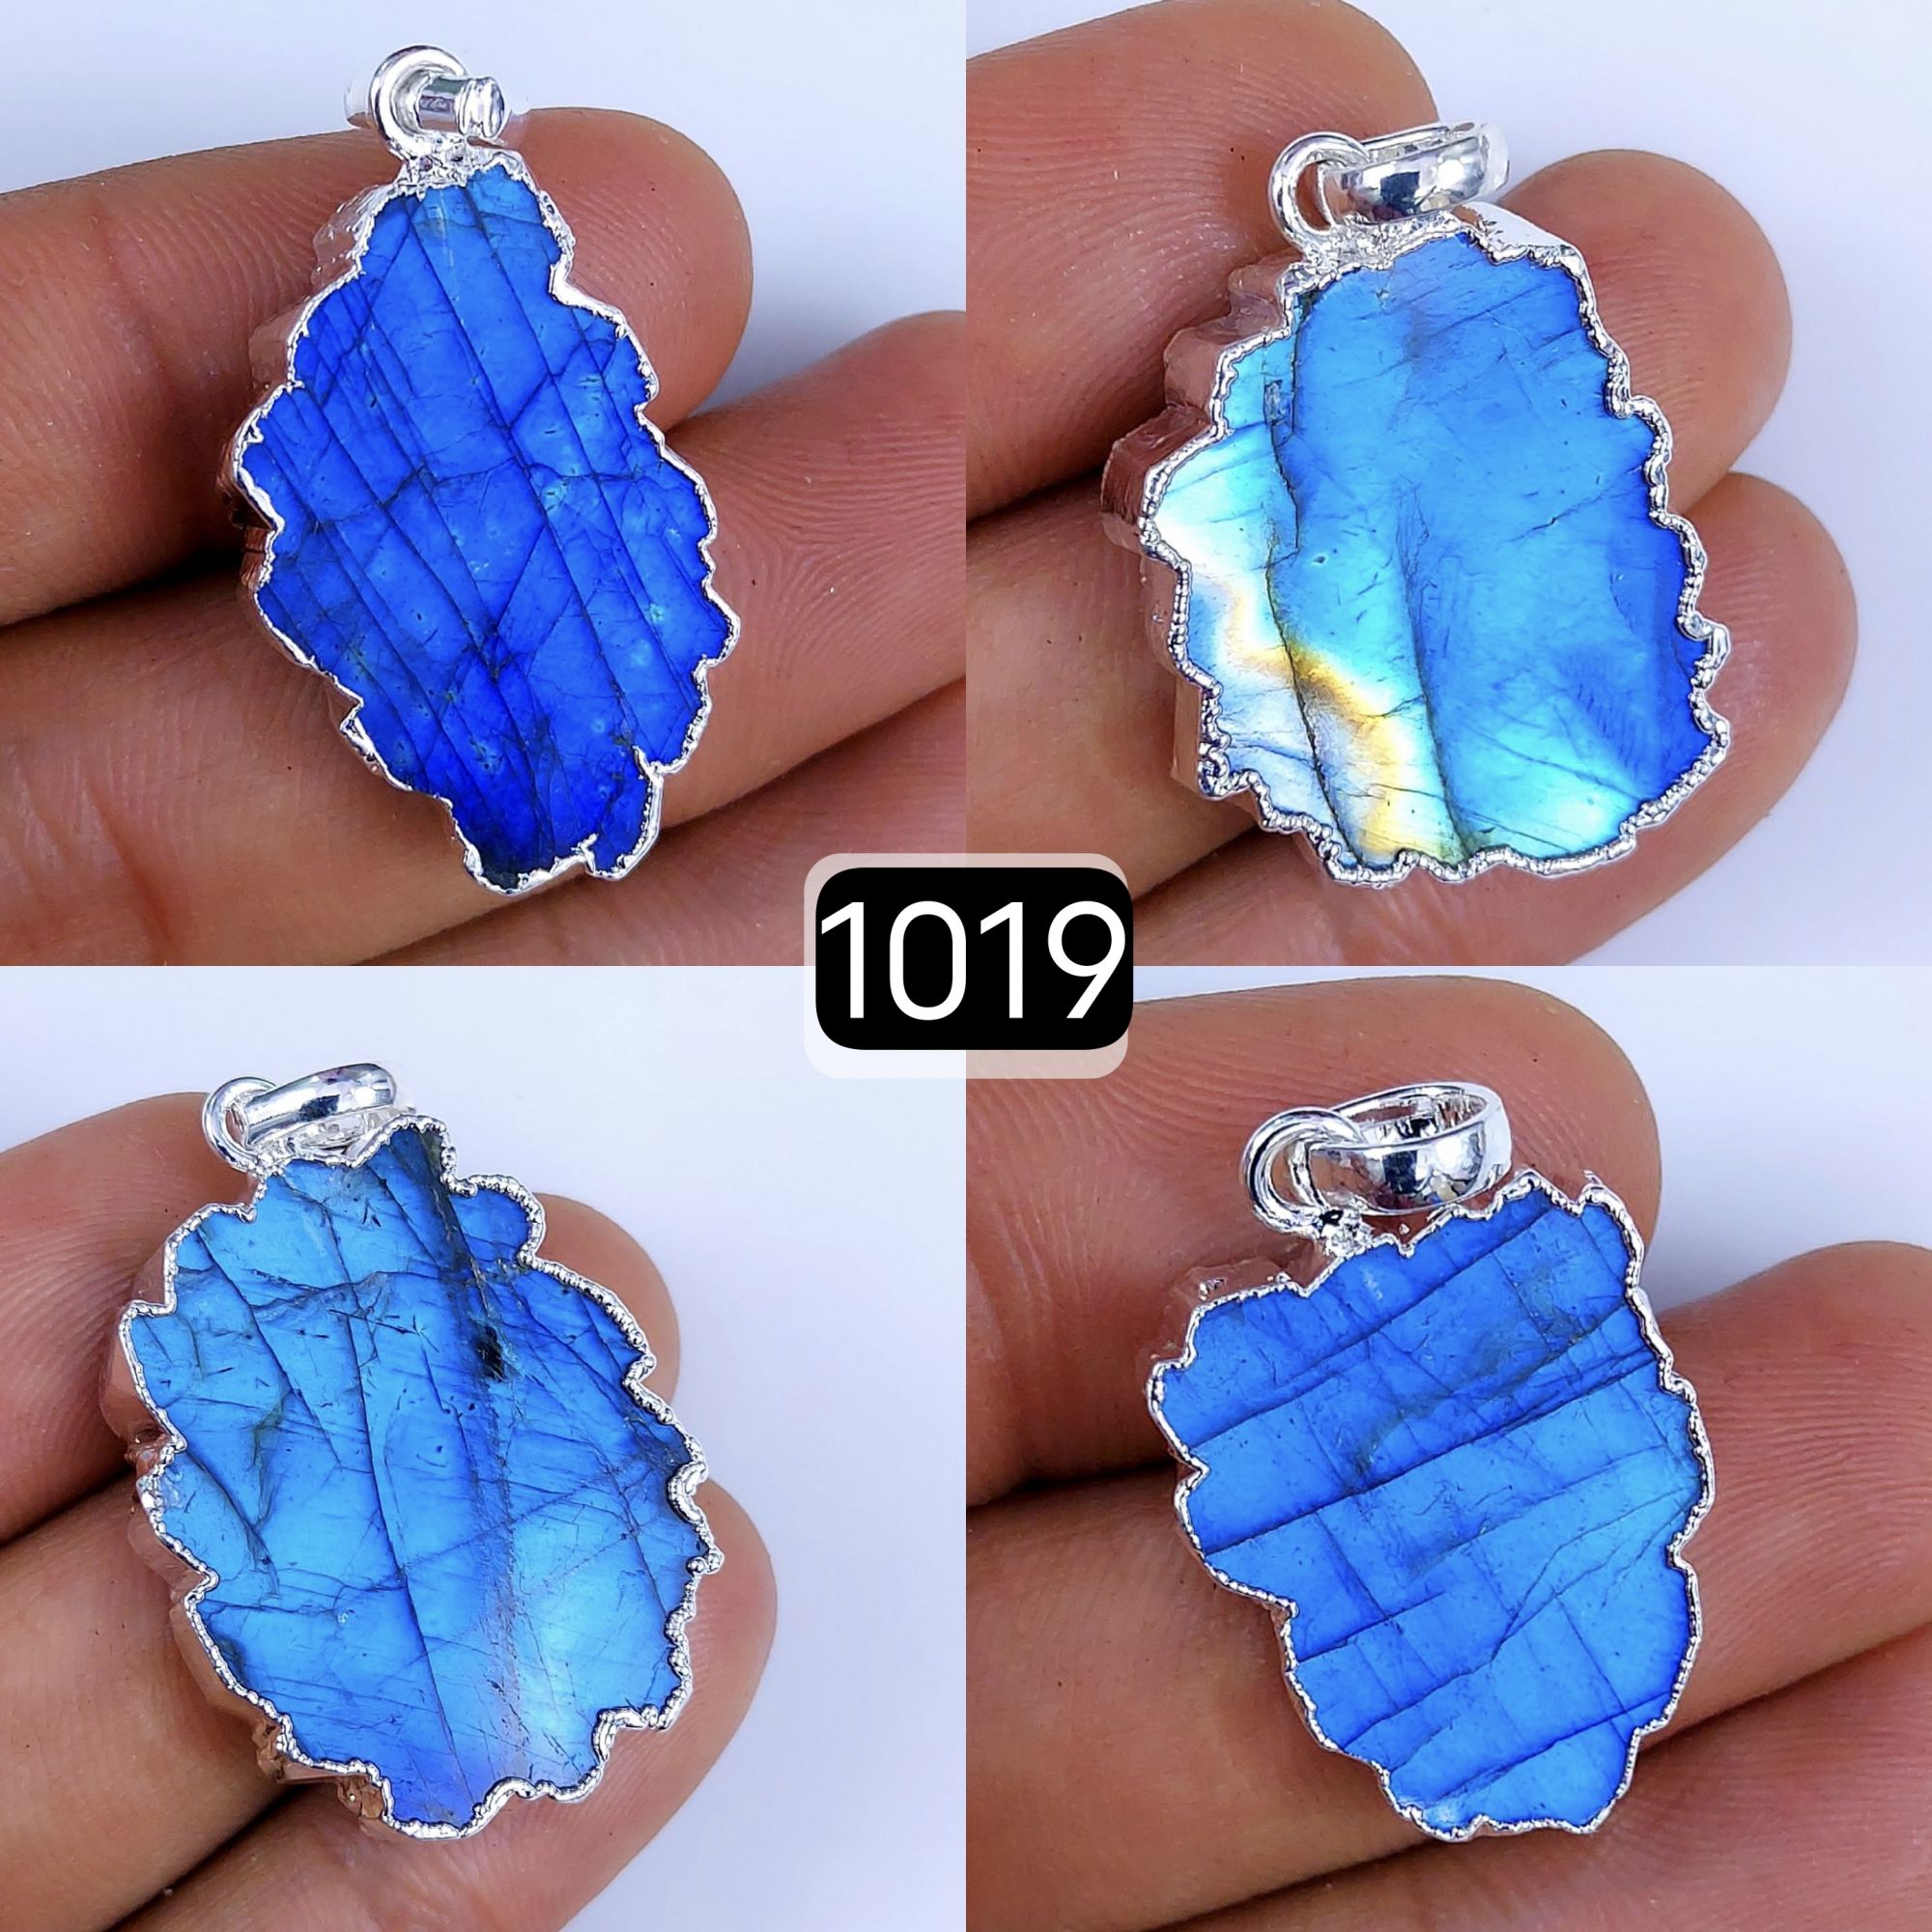 152Cts Natural Blue Labradorite Silver Electroplated Slice Pendant 32x18 22x12mm#1019